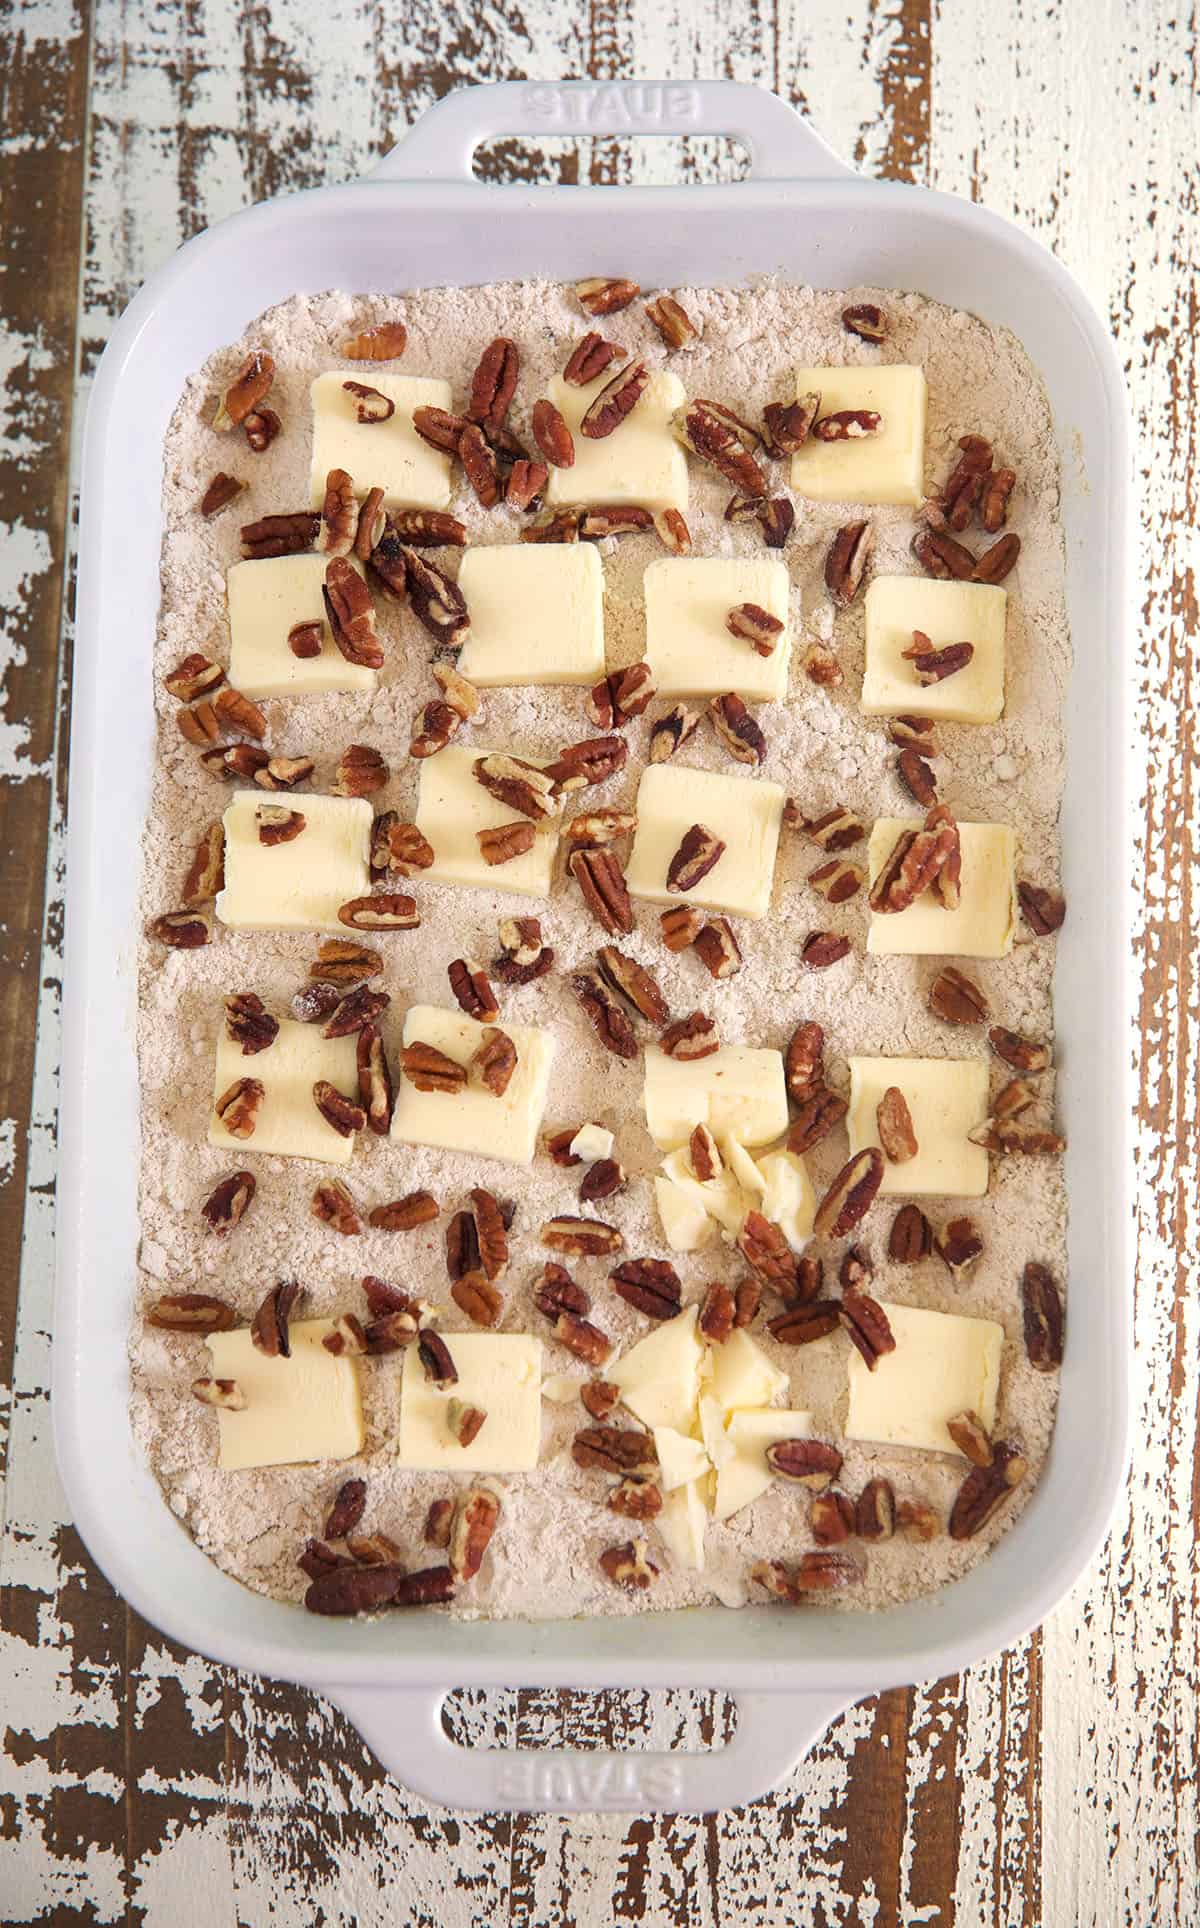 Butter slices and pecans are spread out in a white baking dish on top of cake mix.